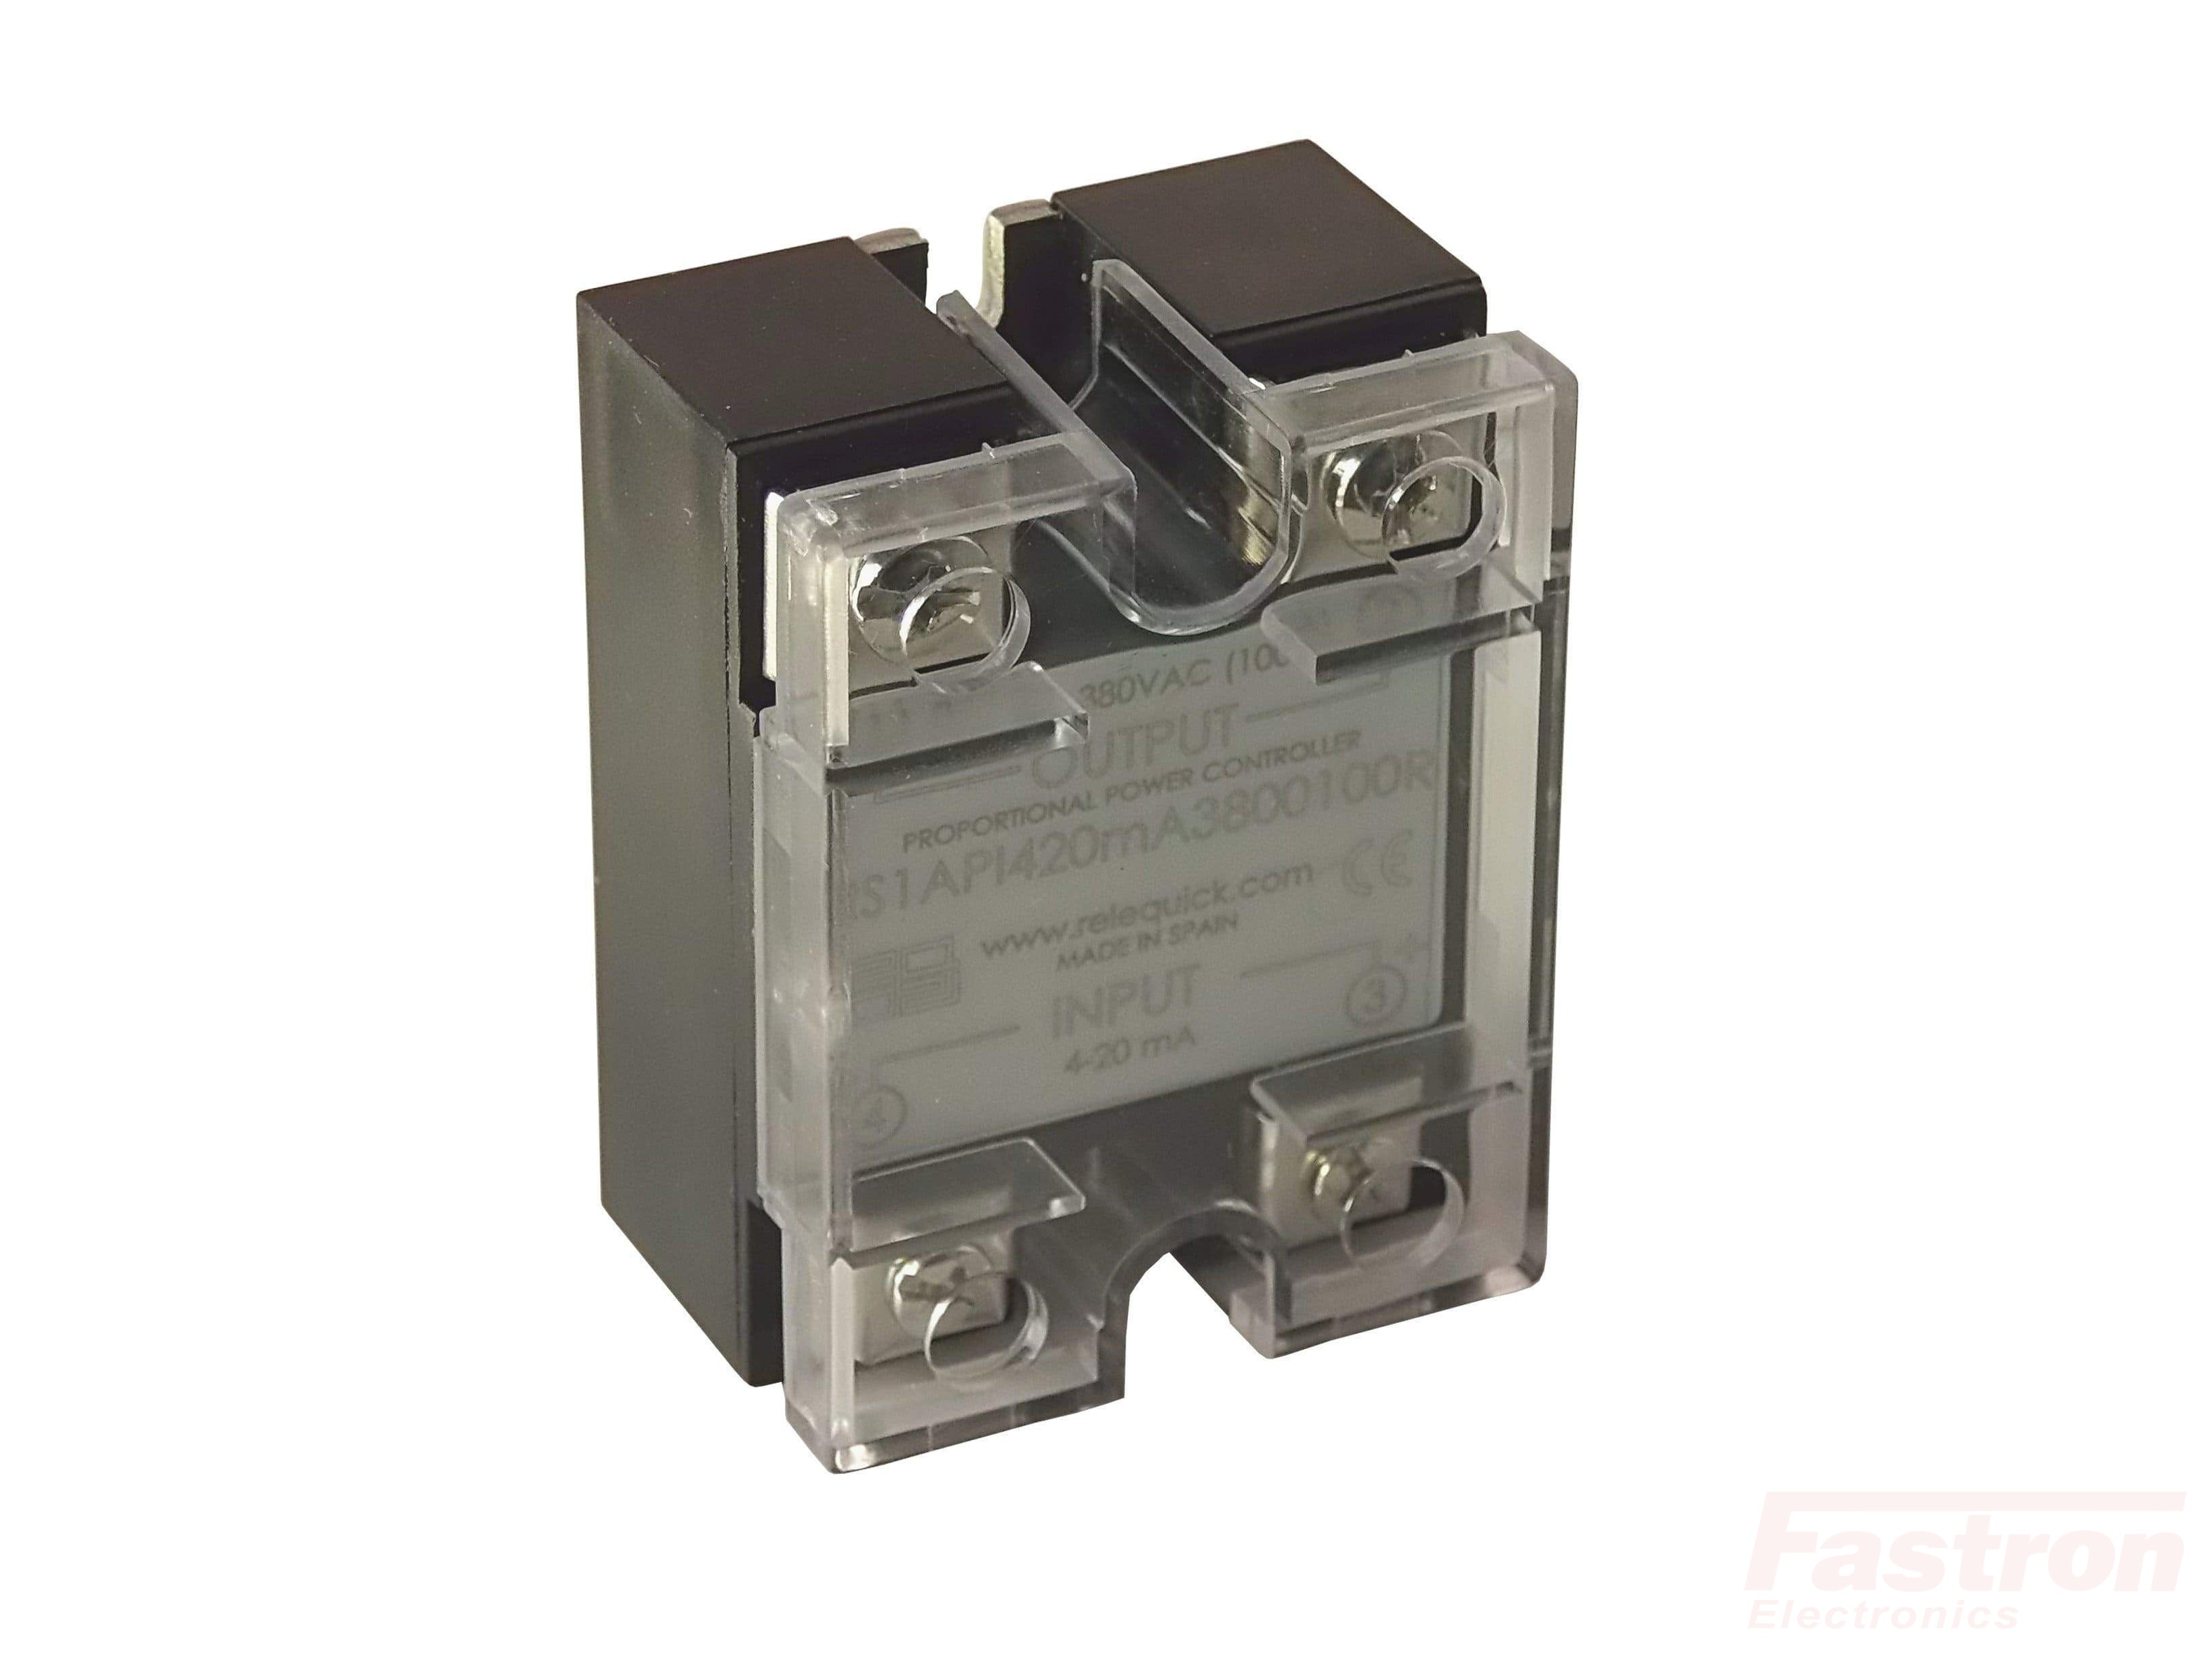 RS1API420MA280060R, Solid State Relay based Integrated Proportional Controller, 4-20mA Input, 240VAC 60Amp Load